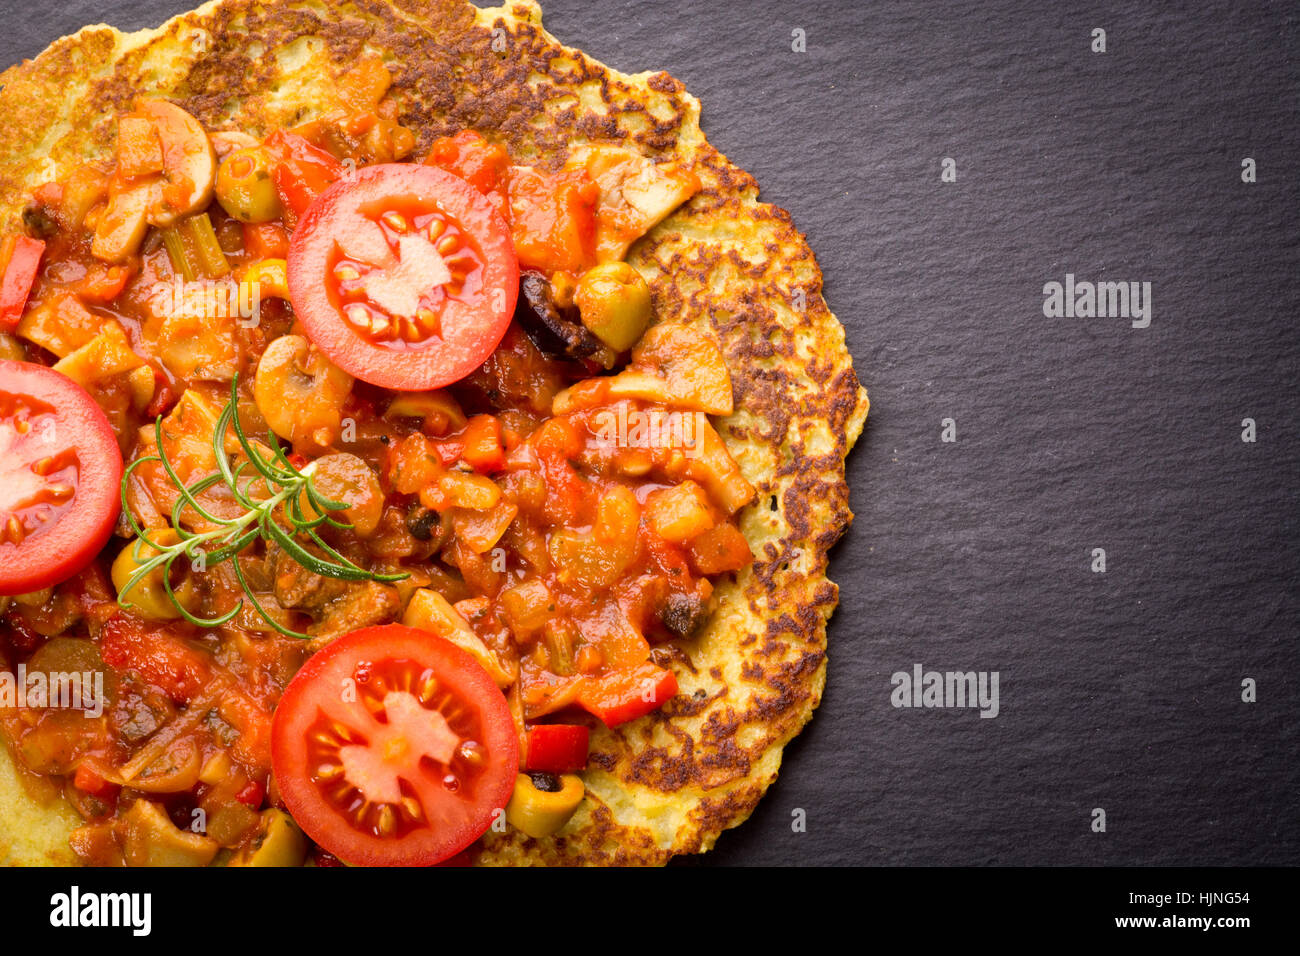 Hungarian style potato pancake with stew and tomatoes Stock Photo